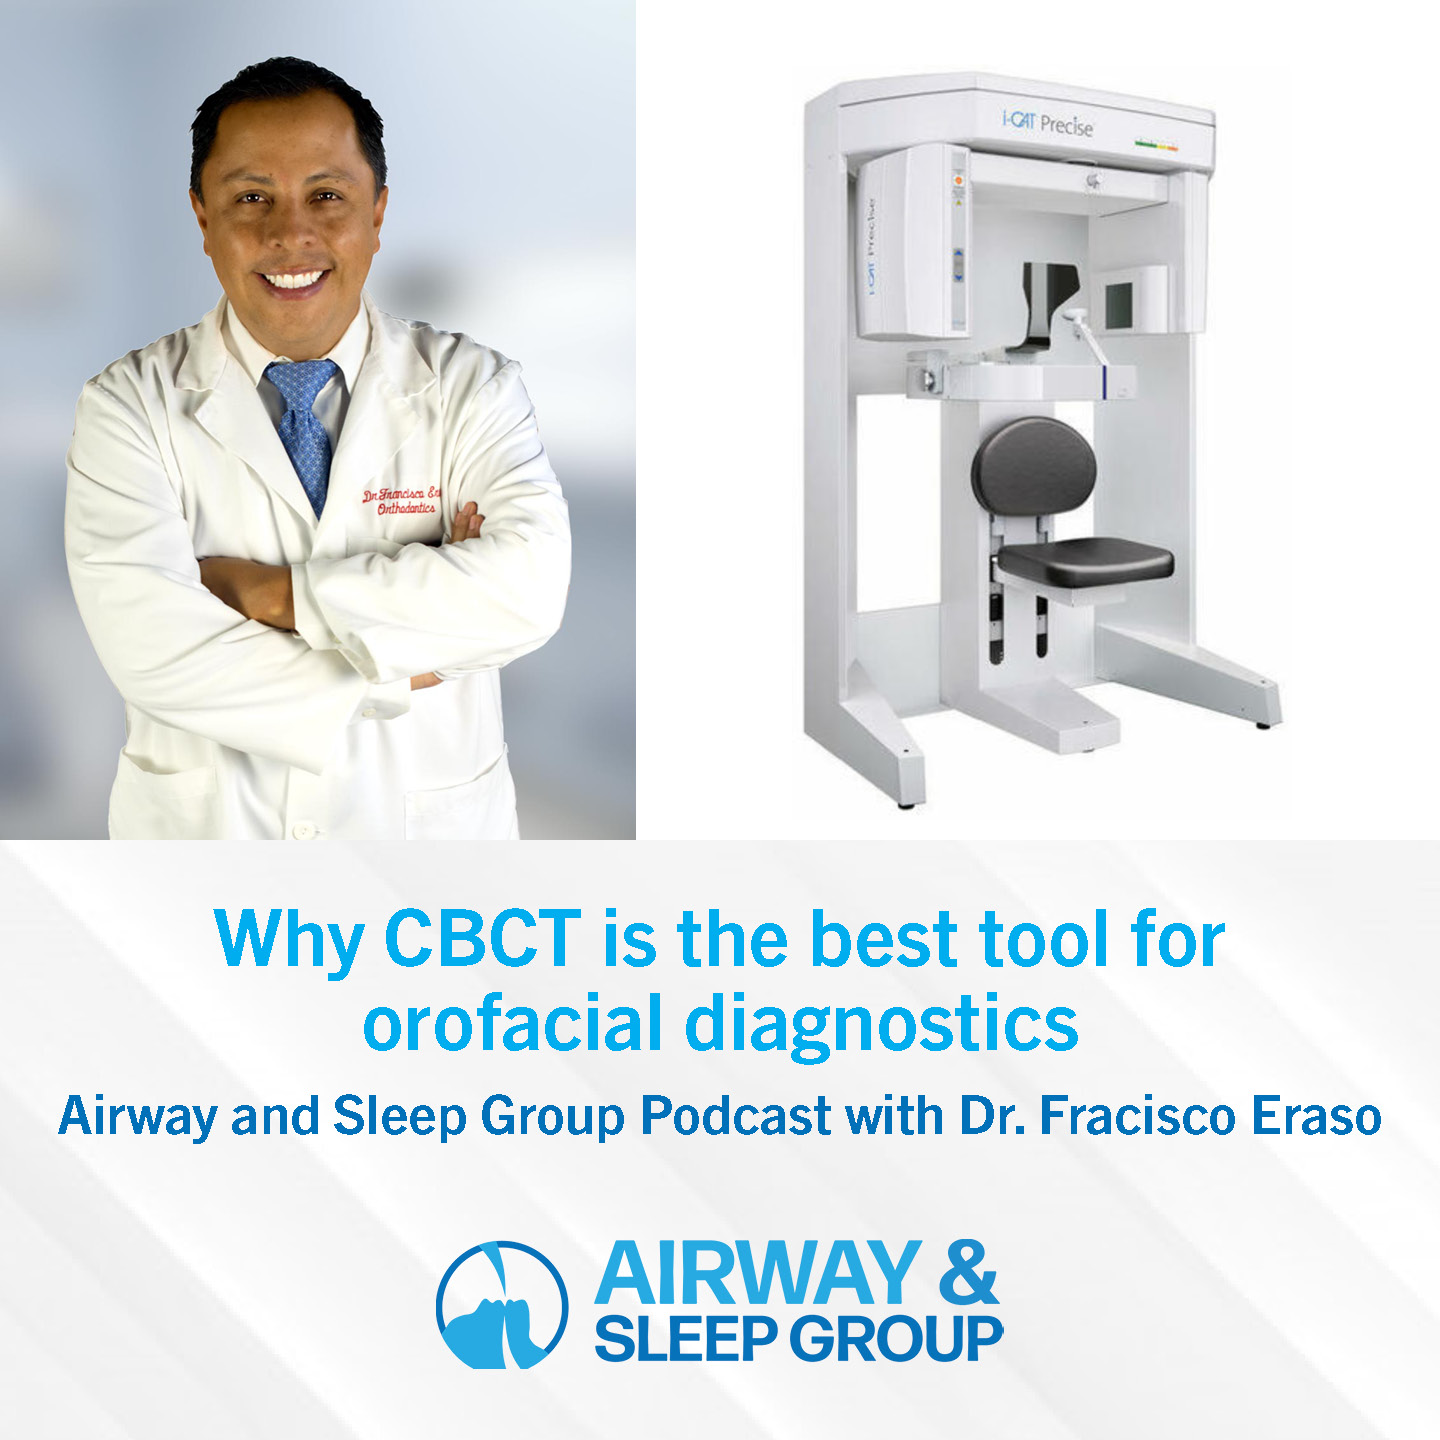 Why CBCT is a great tool